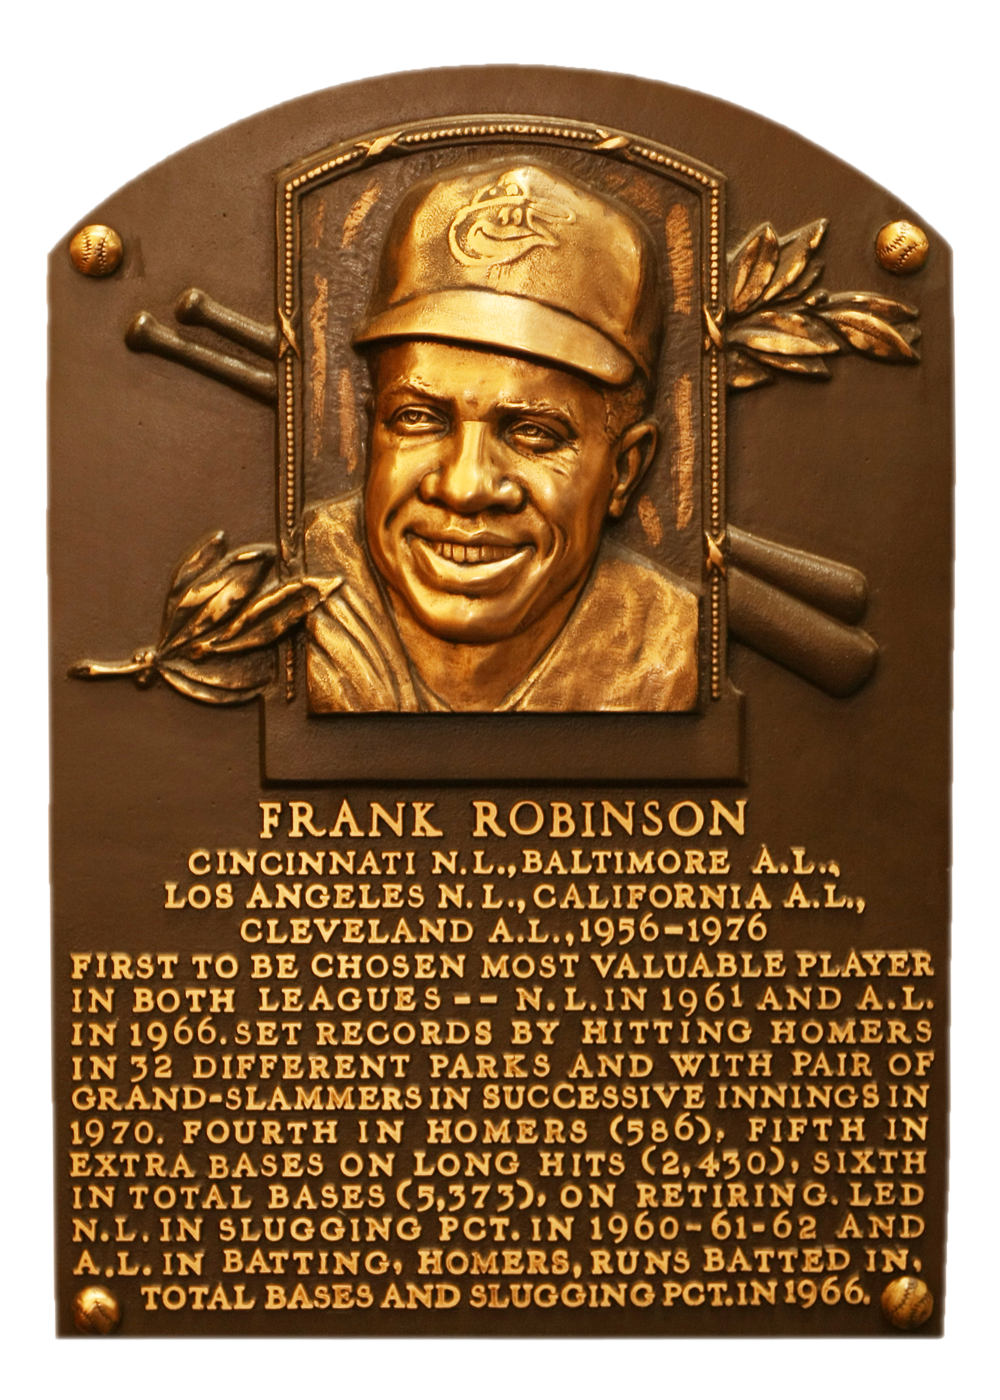 Frank Robinson Hall of Fame plaque